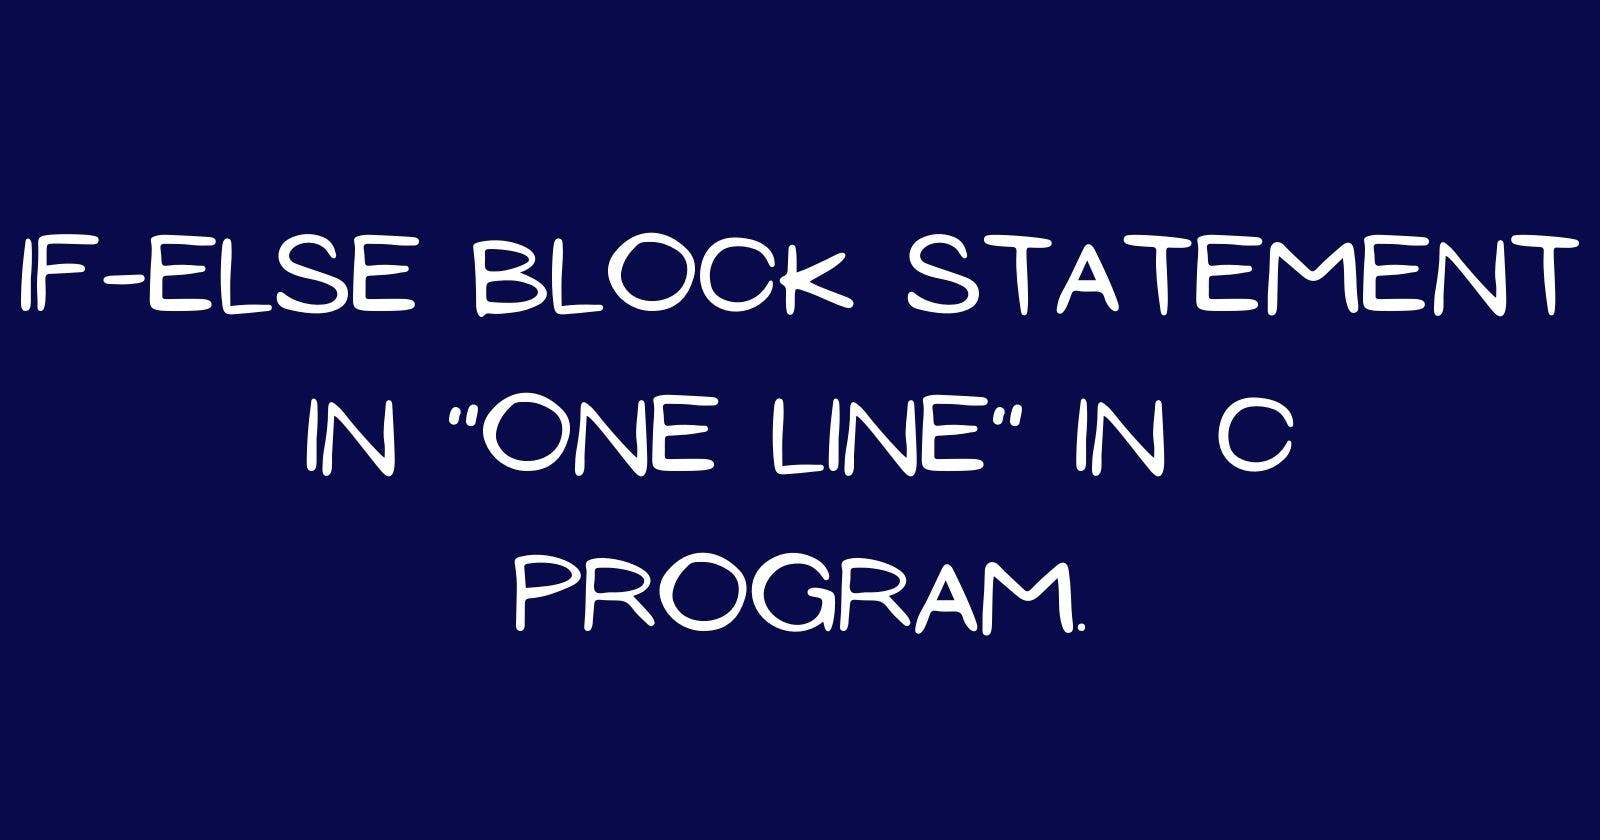 If-Else Block Statements in One Line in C